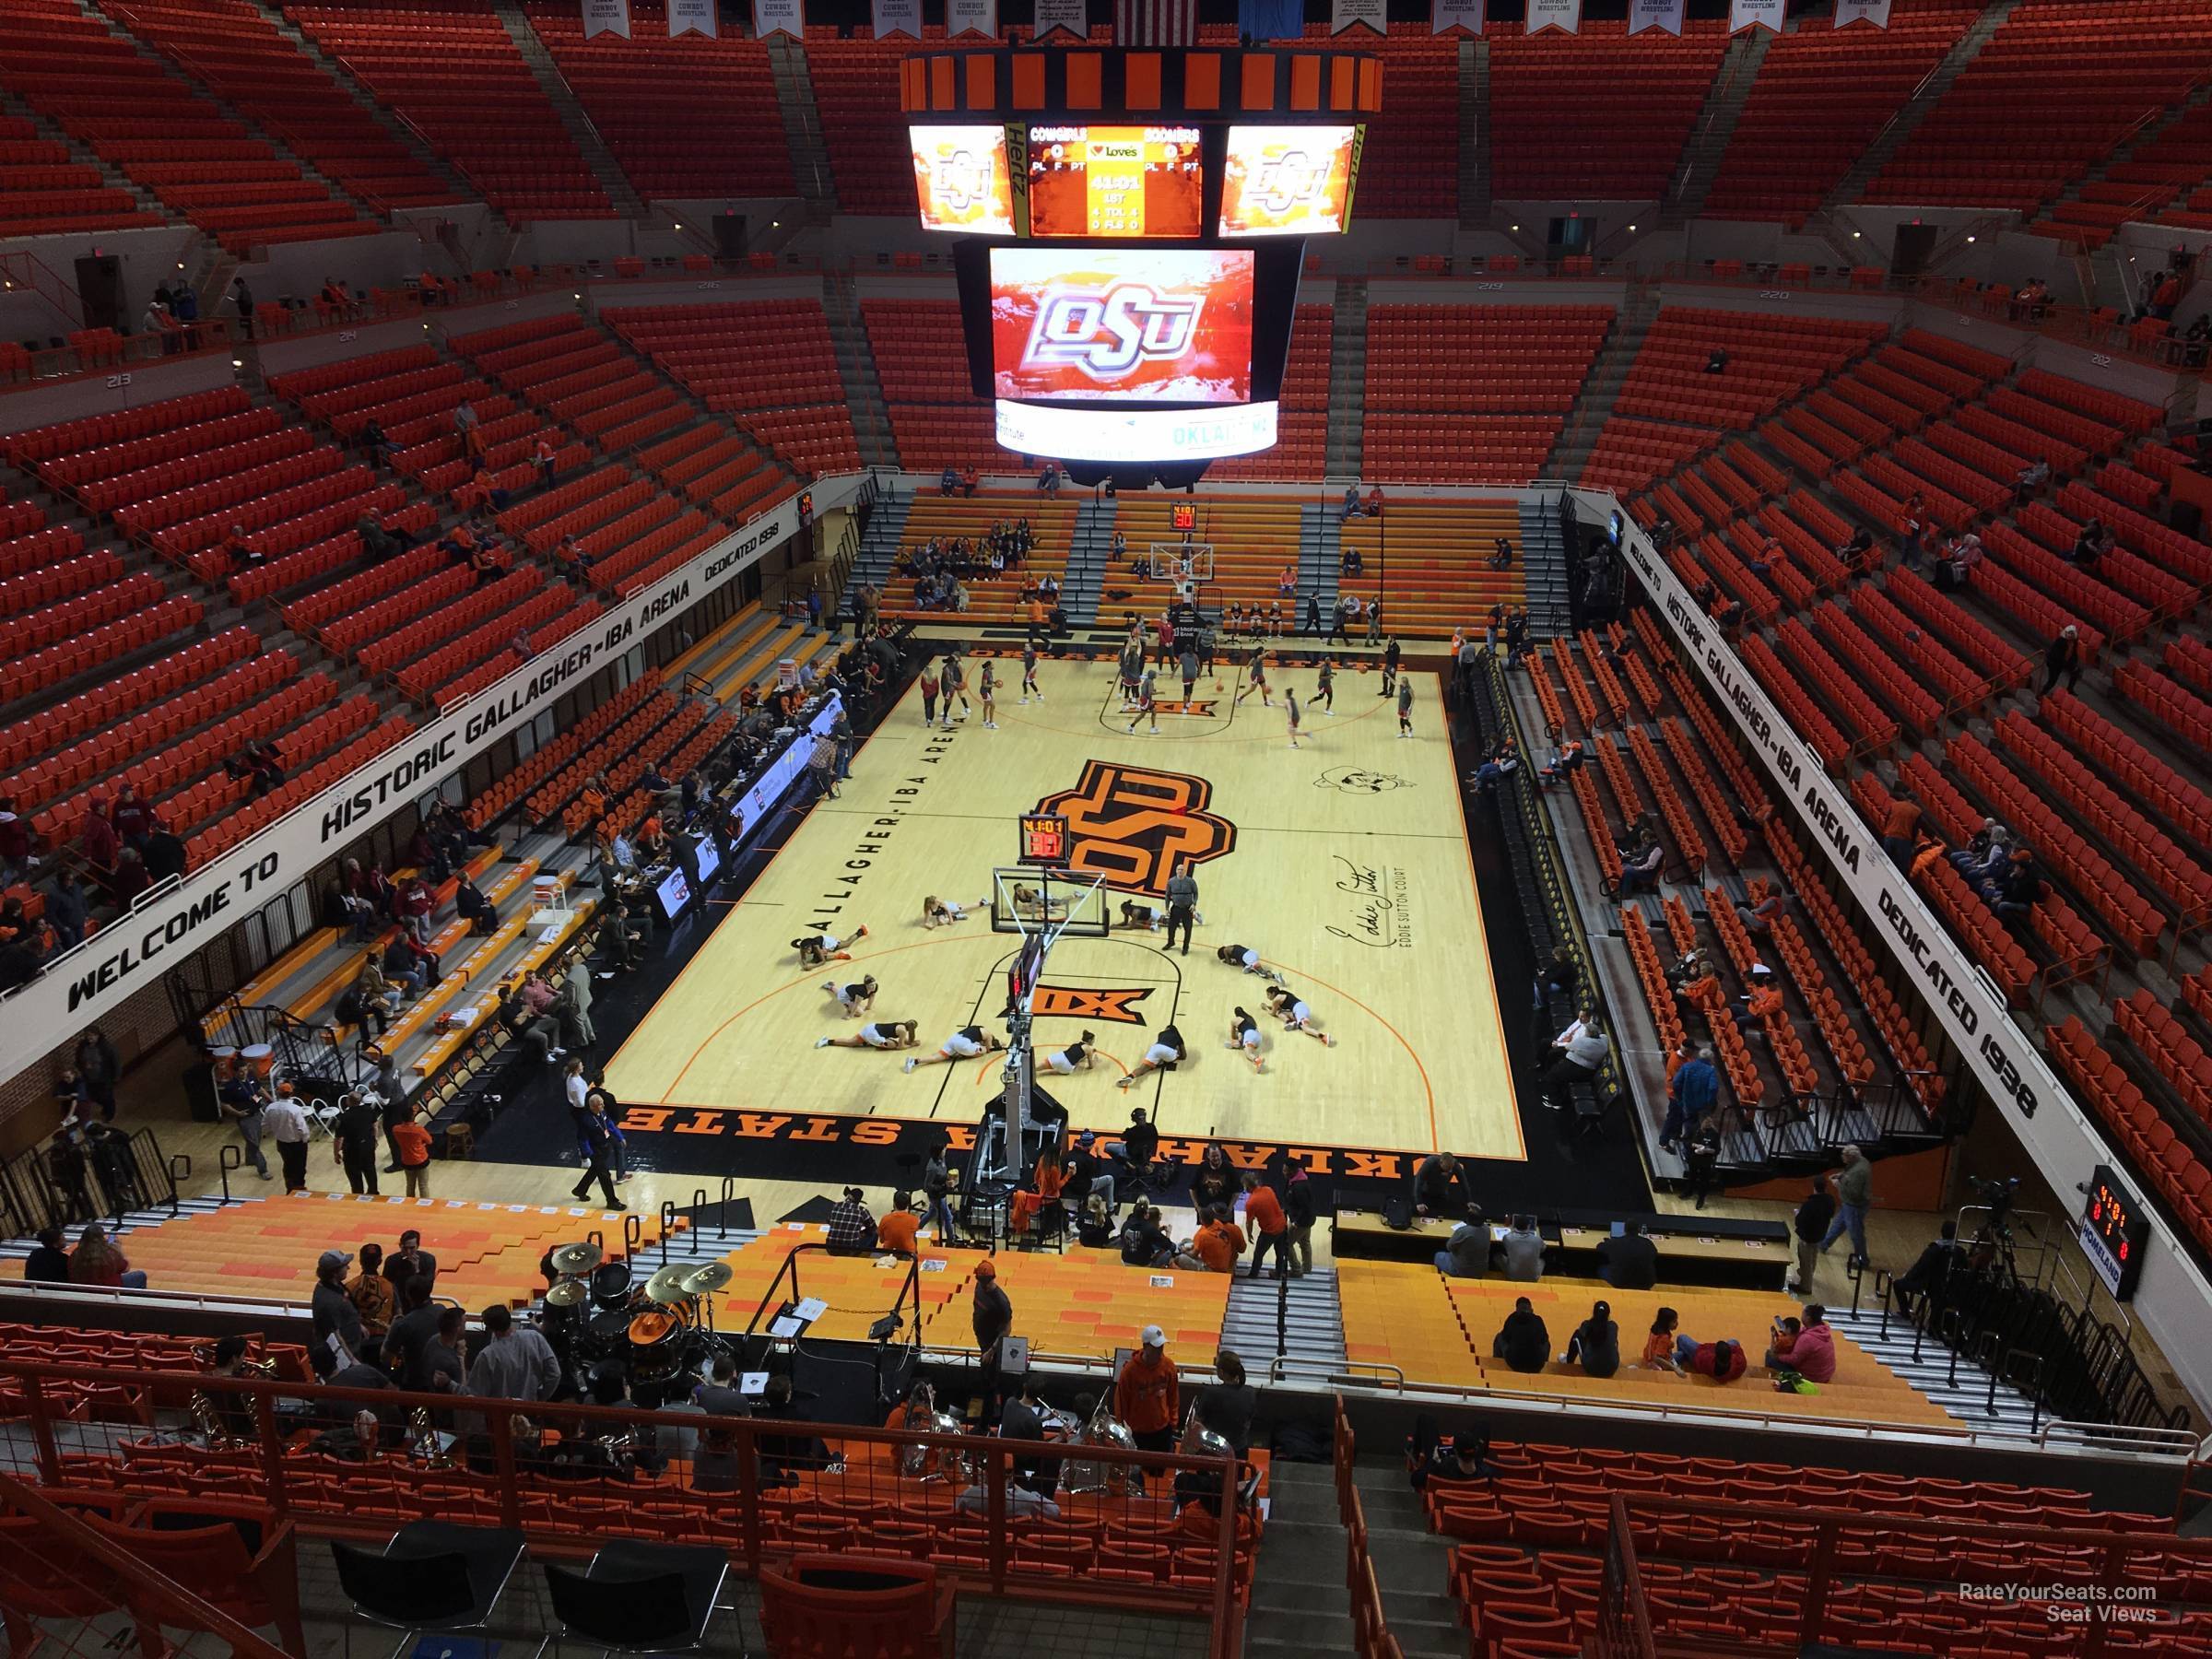 section 310, row 5 seat view  - gallagher-iba arena